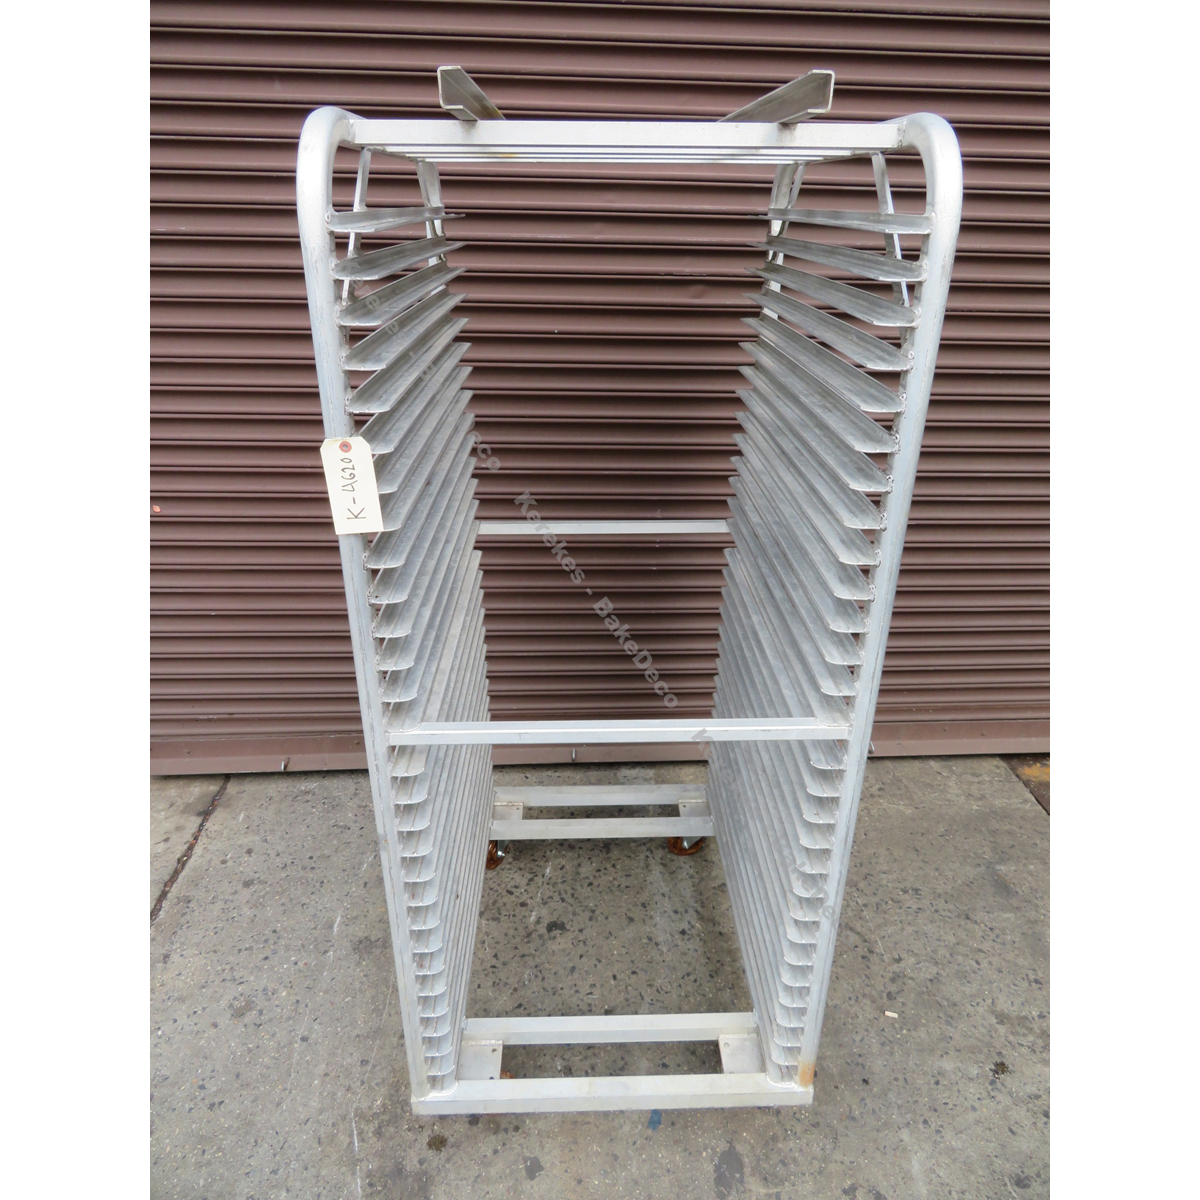 Double Oven Rack For Baxter Double Rack Oven, Used Excellent Condition image 2